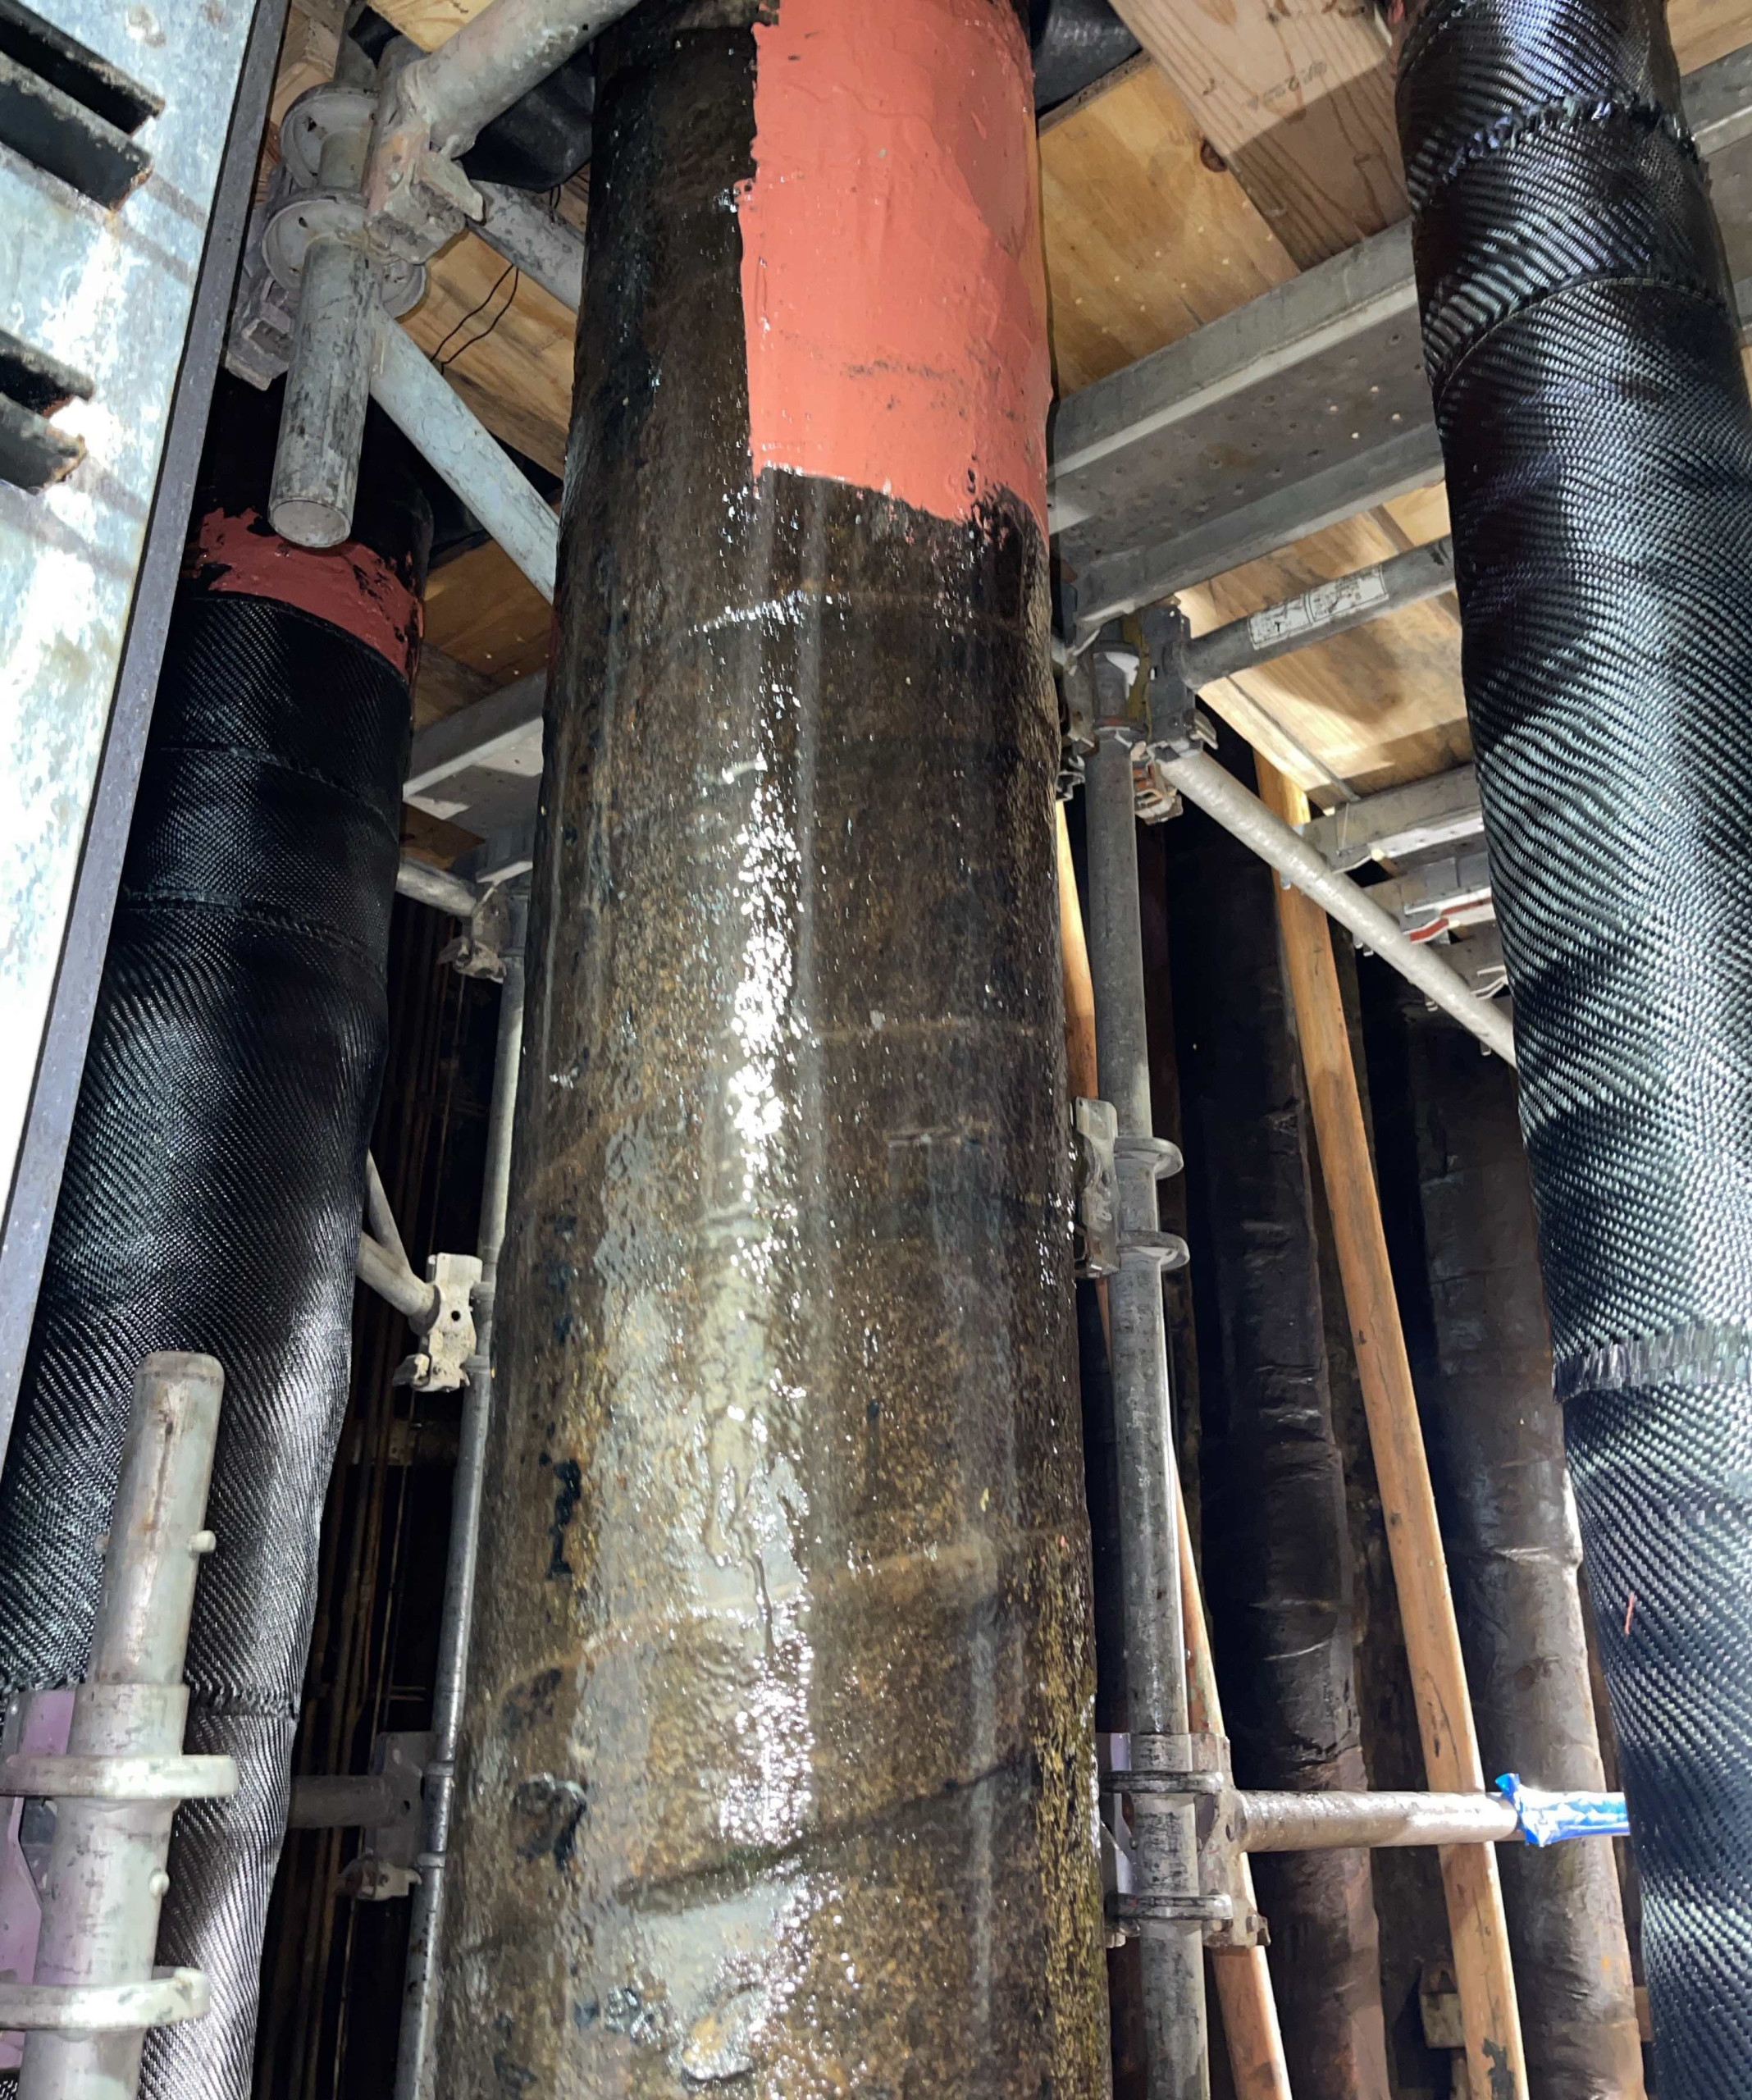 Three vertical pipes with composite pipe repair wrapped around them.